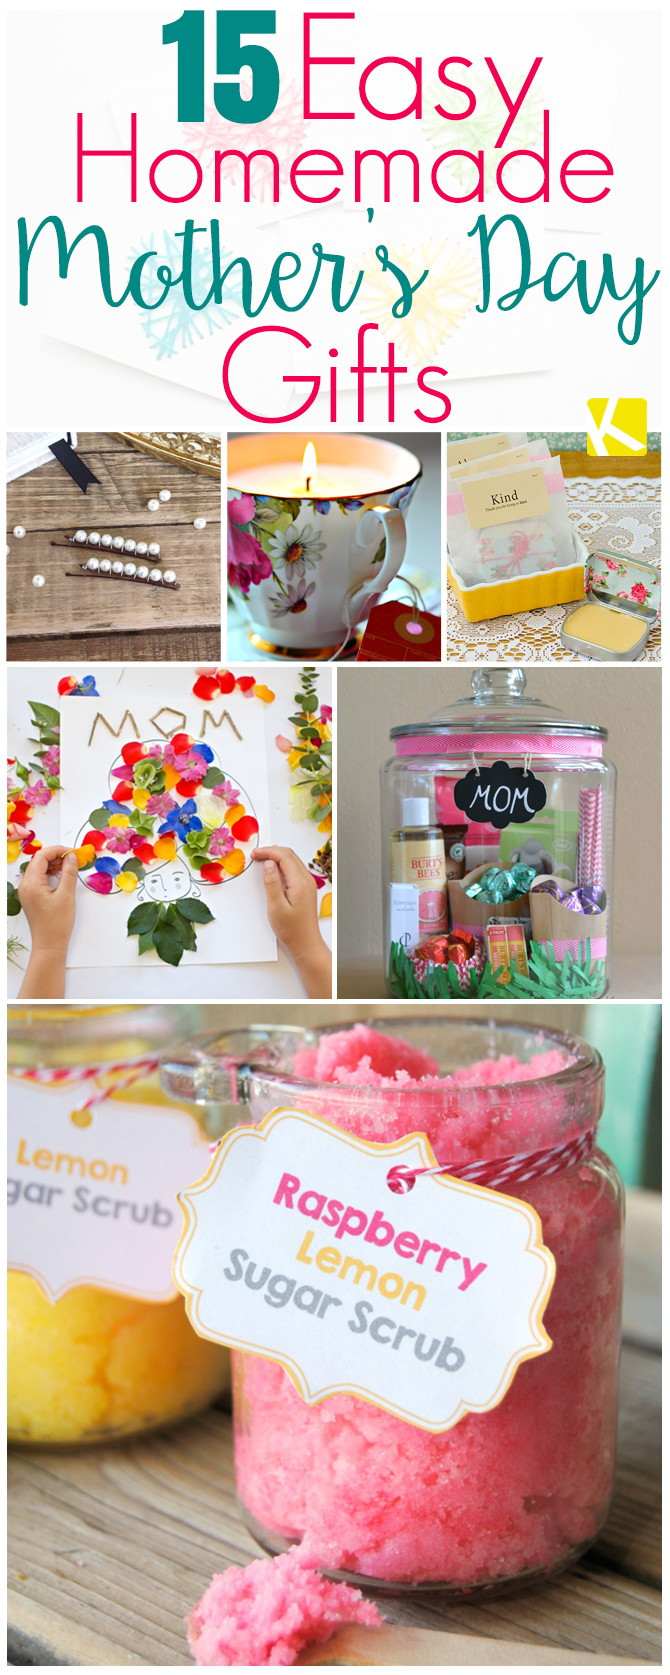 Easy DIY Mothers Day Gifts
 15 Mother’s Day Gifts That Are Ridiculously Easy to Make